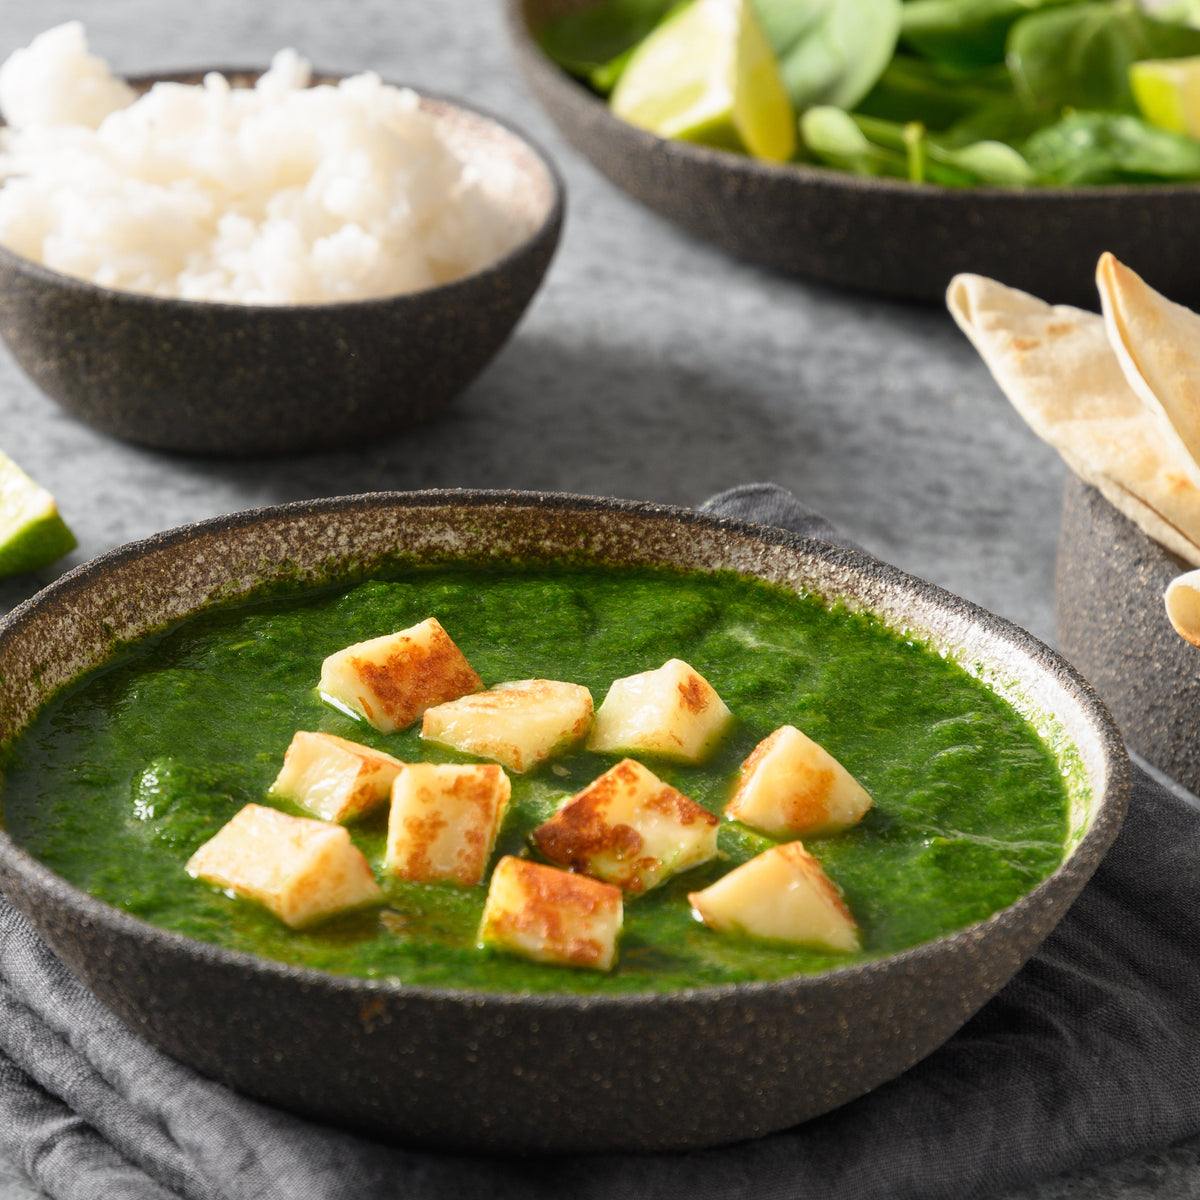 Saag Paneer Assembly Instructions